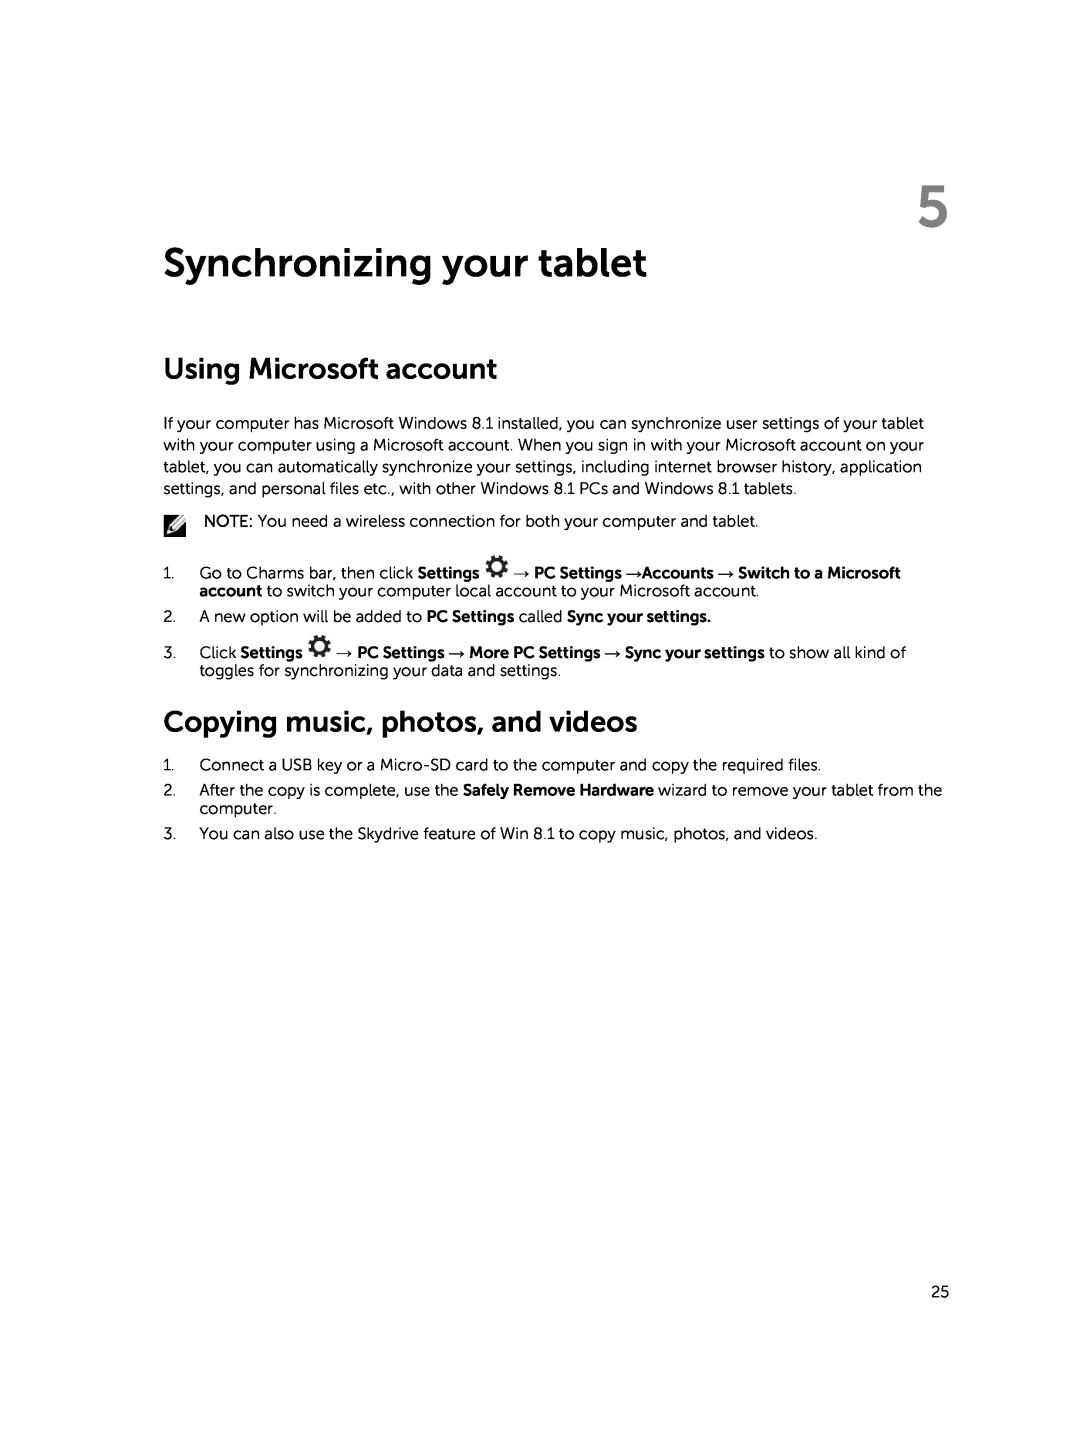 Dell T06G manual Synchronizing your tablet, Using Microsoft account, Copying music, photos, and videos 